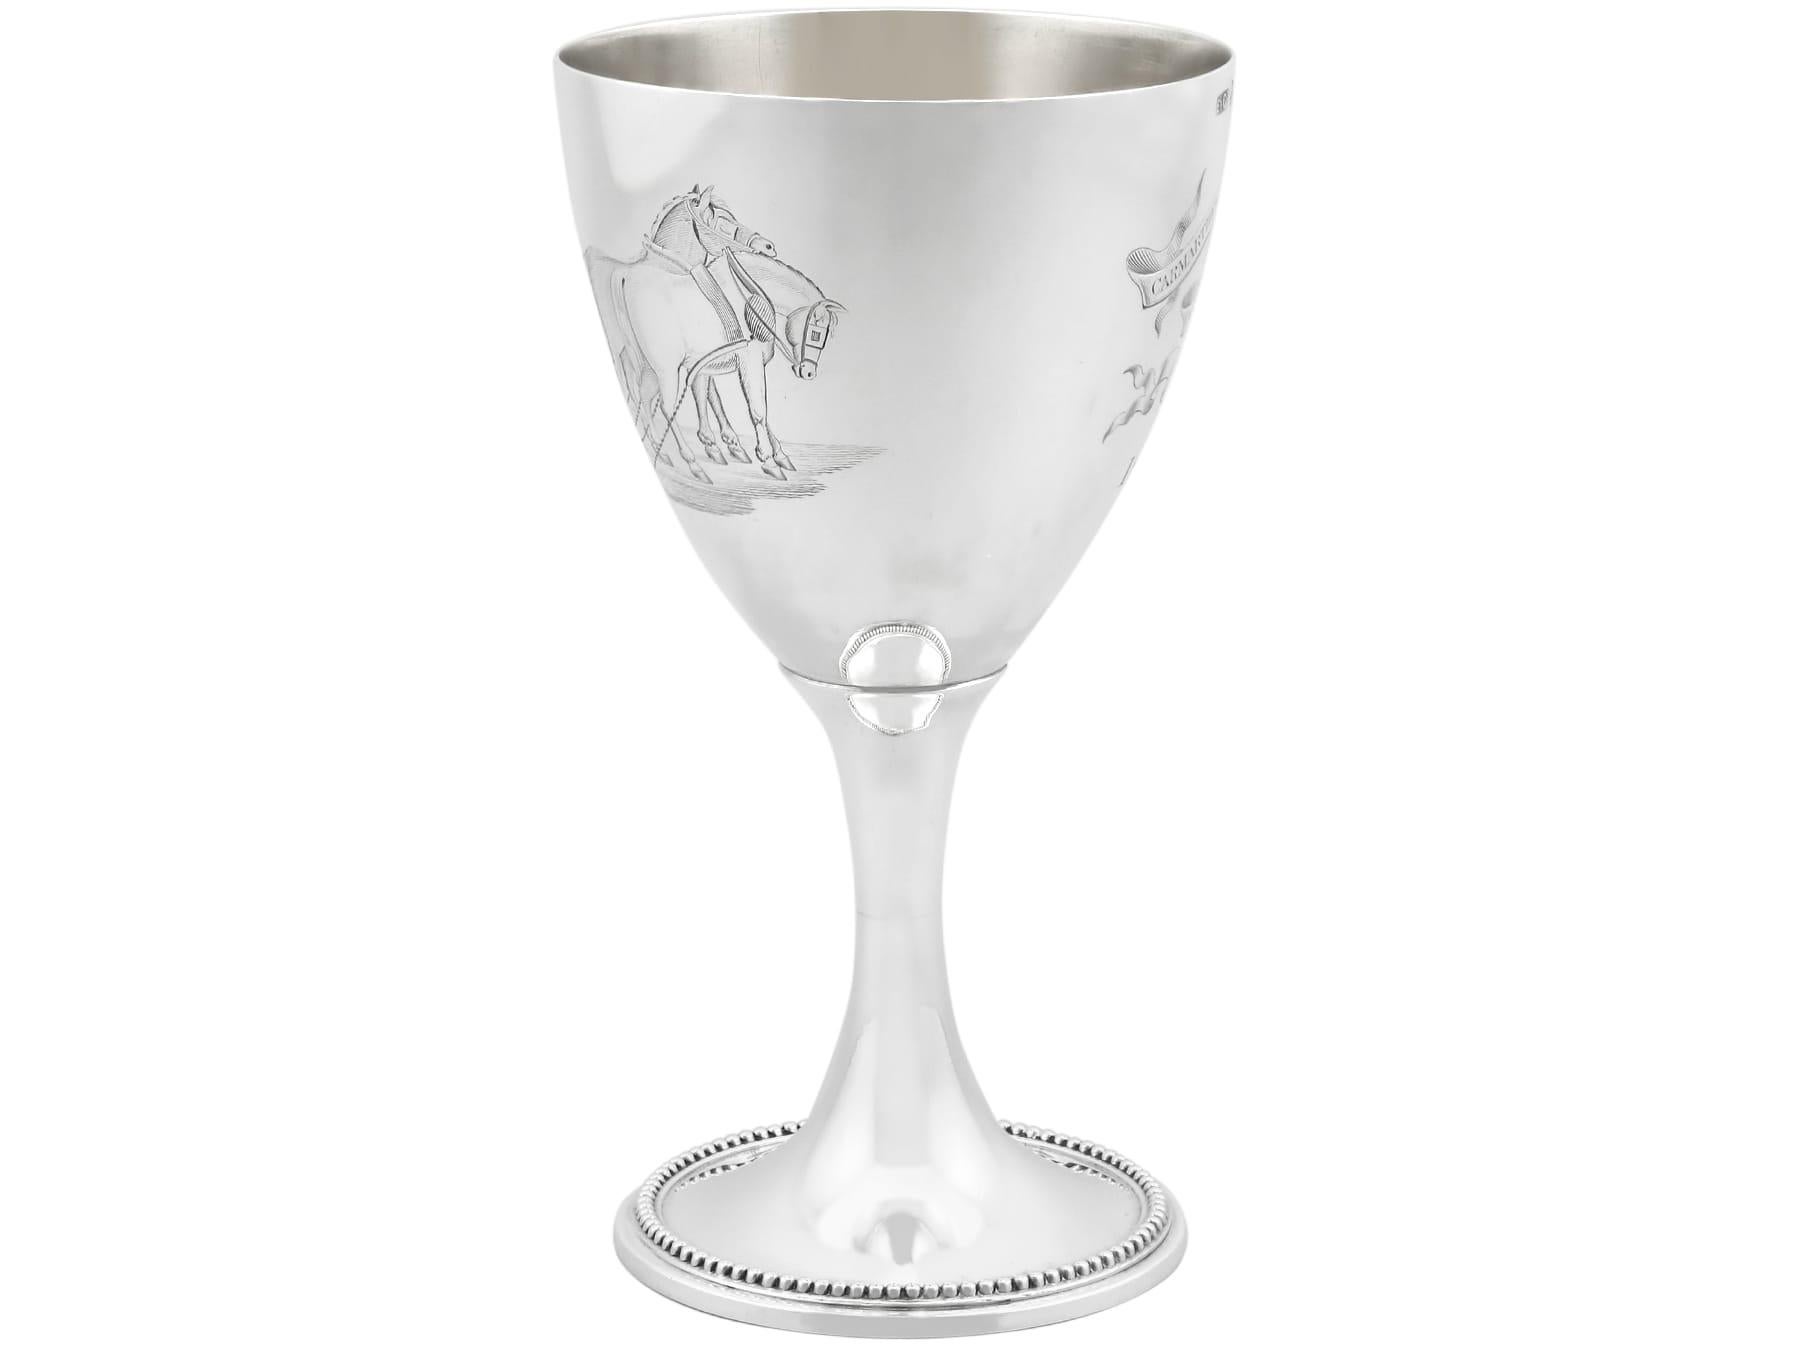 An exceptional, fine and impressive antique Victorian English sterling silver engraved goblet; an addition to our collection of wine and drinks related silverware.

This exceptional antique Victorian sterling silver goblet has a circular bell-shaped